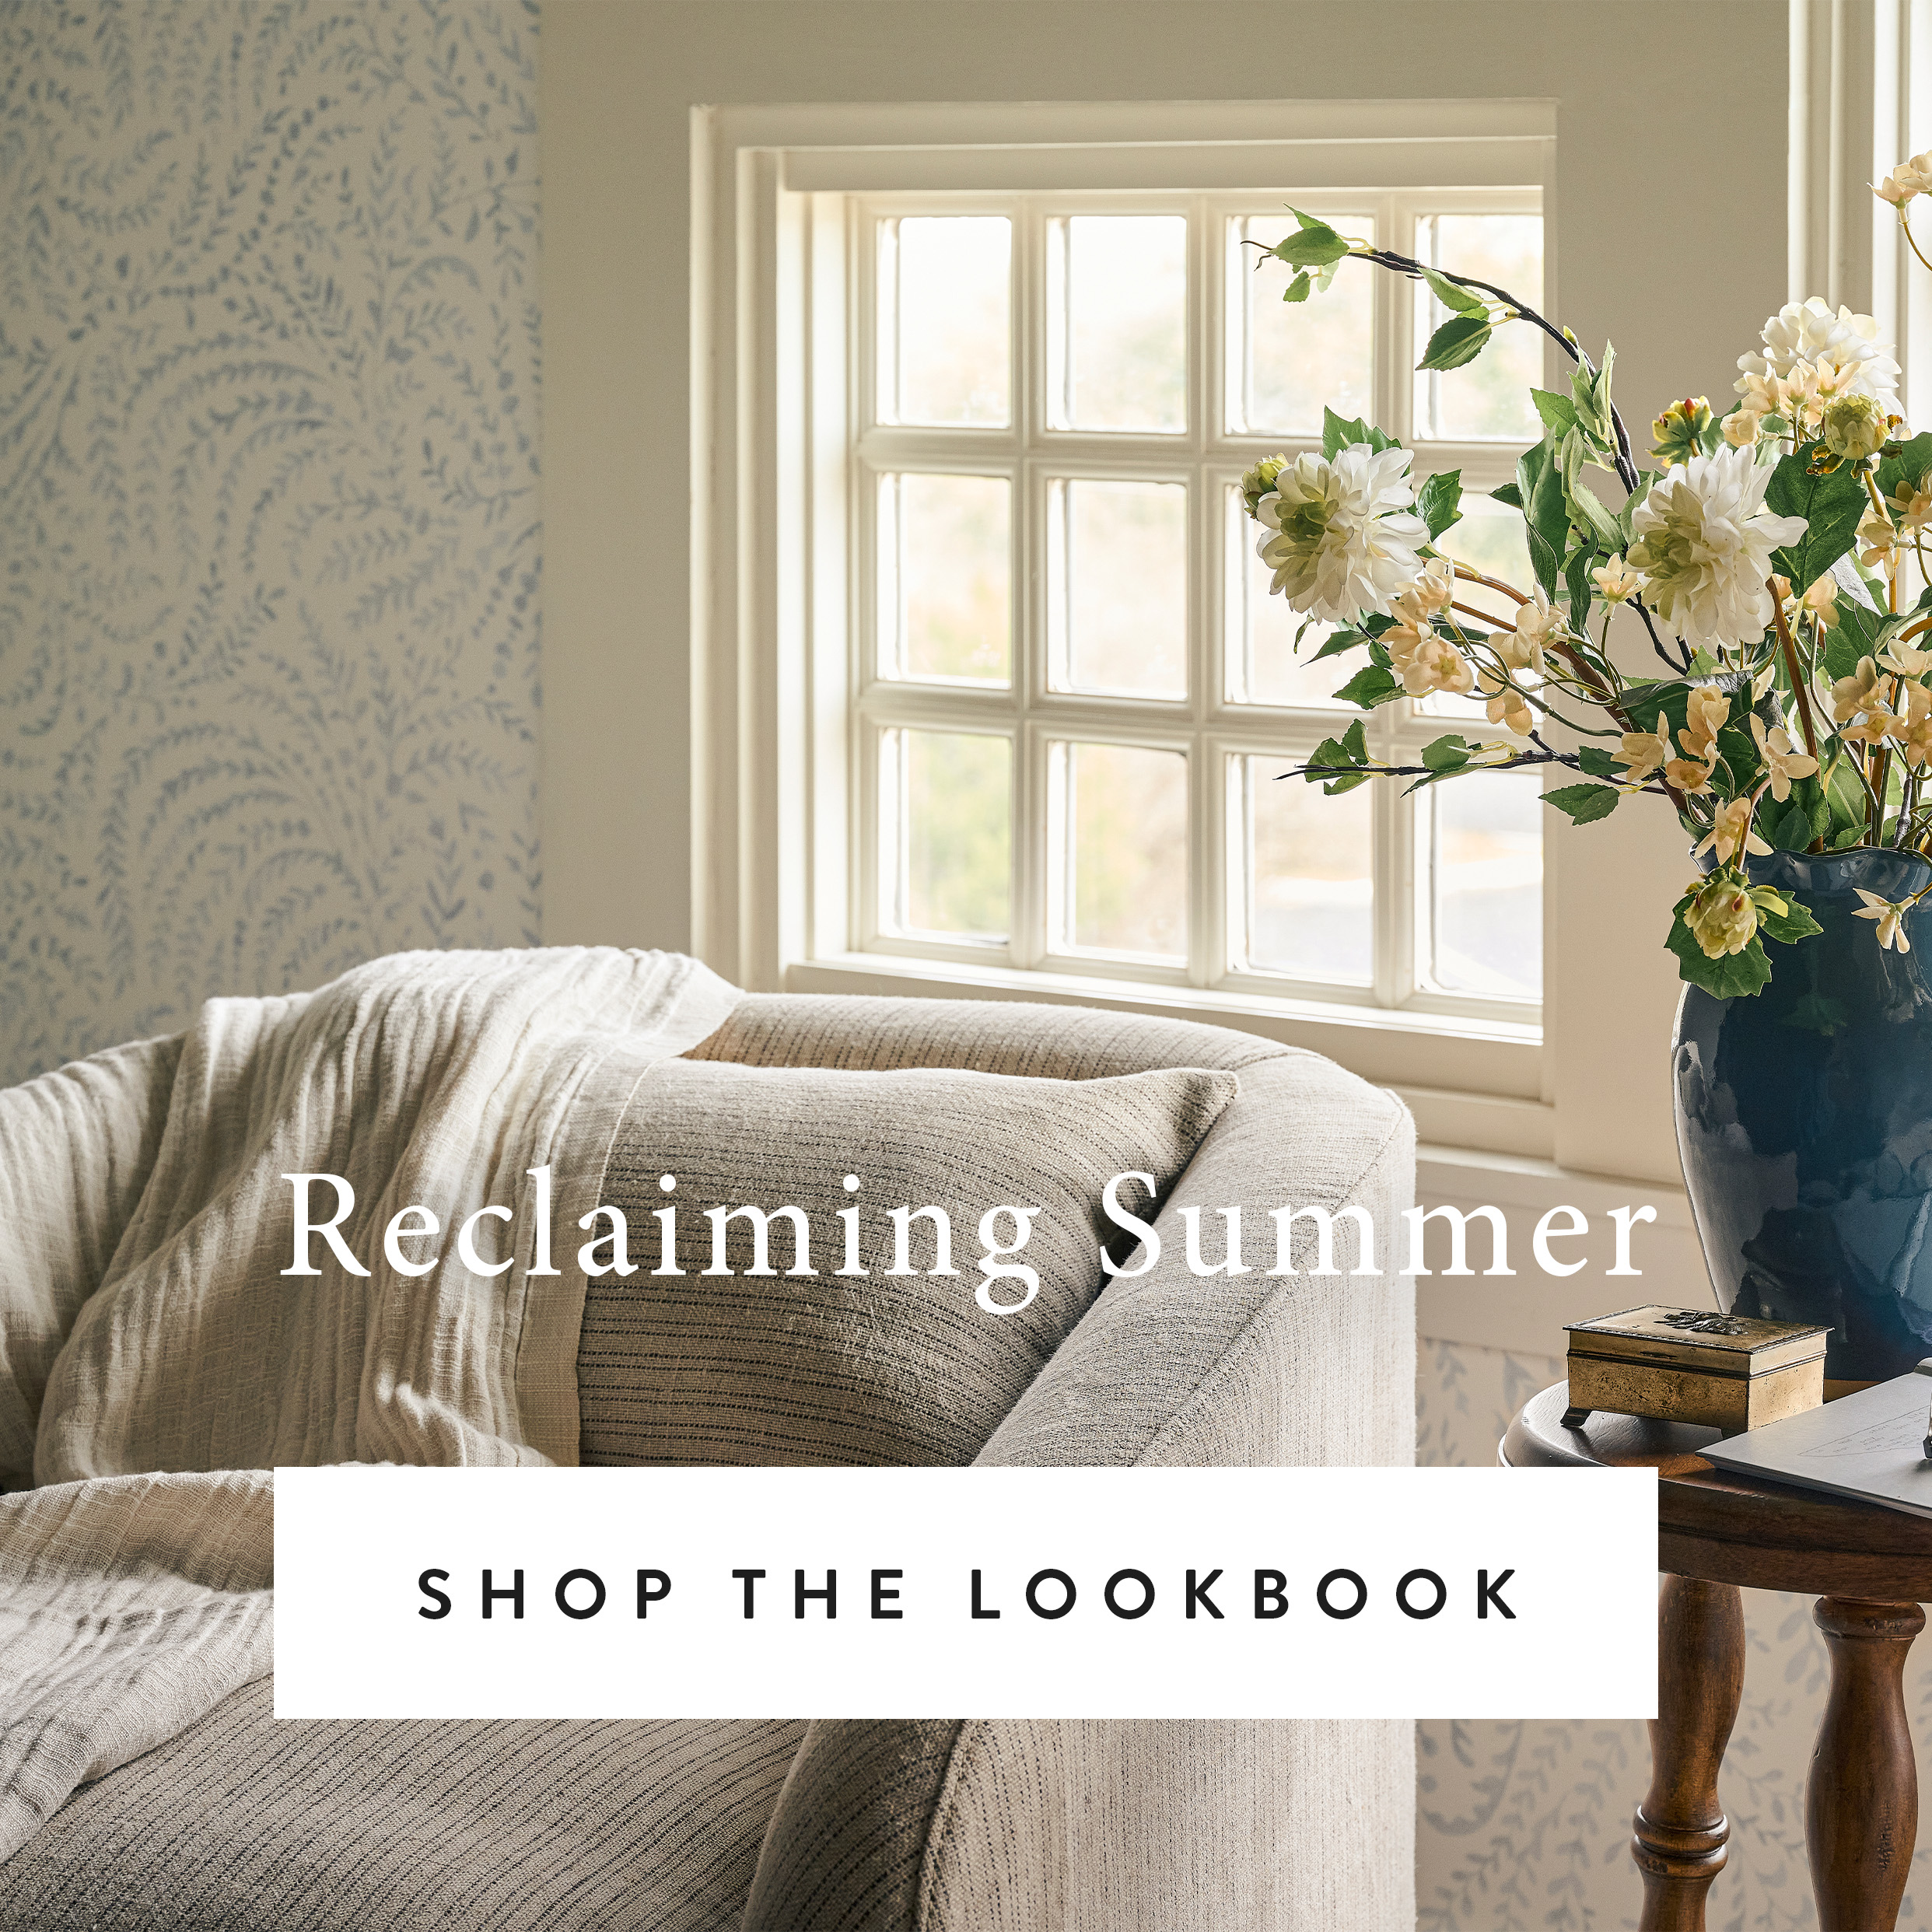 Reclaiming Summer.  Shop the lookbook here.